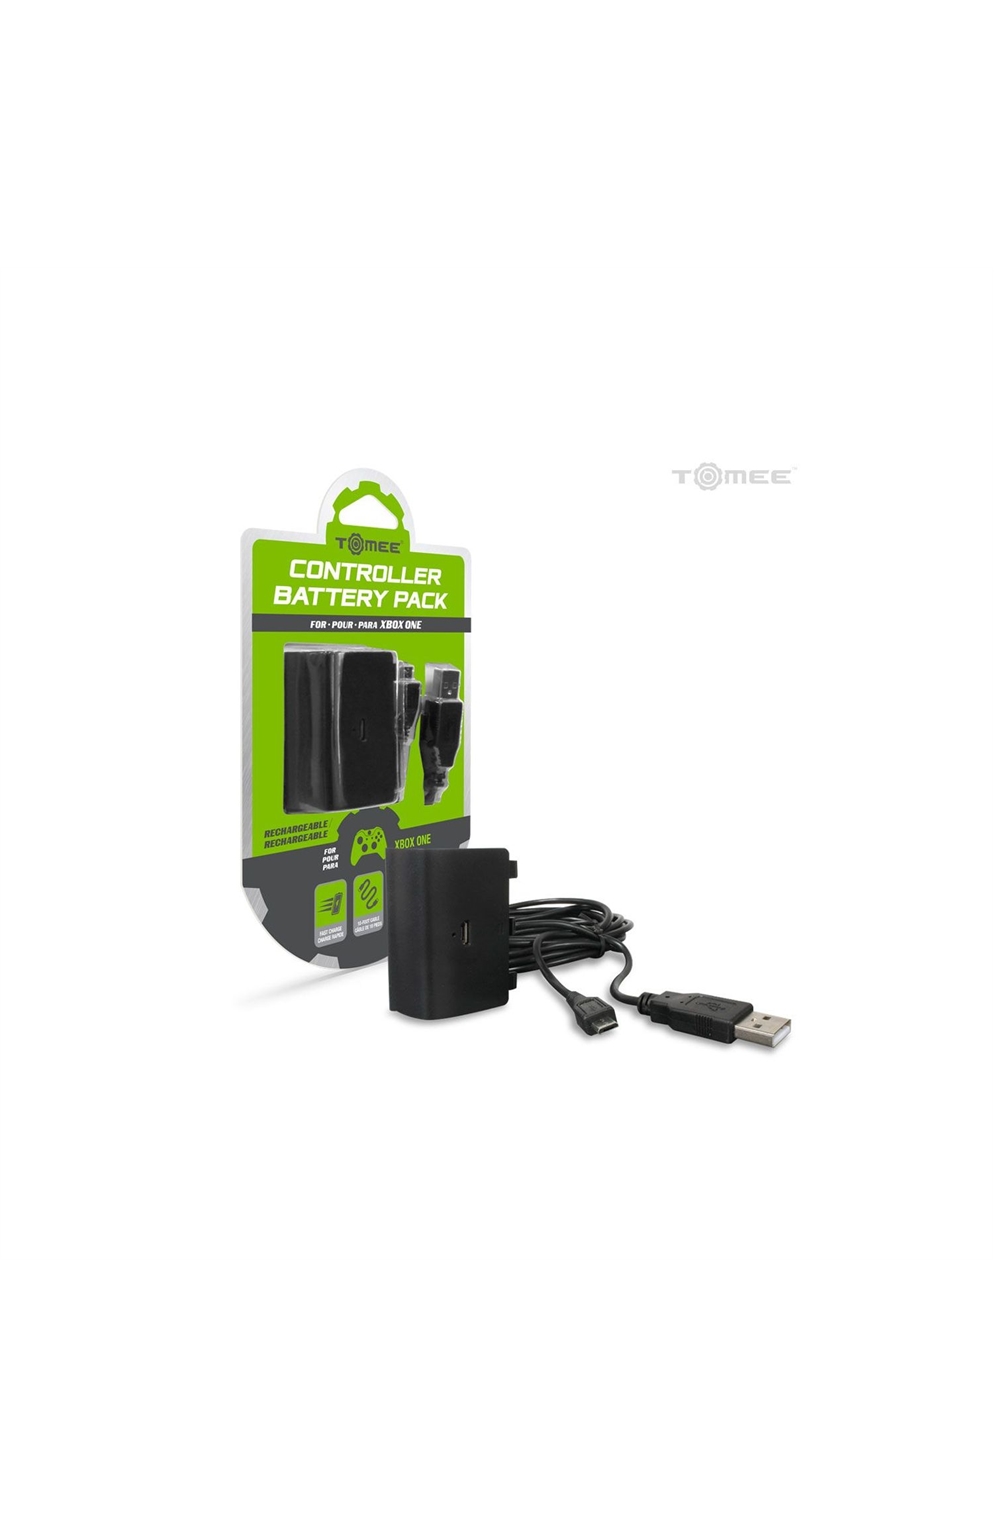 Xbox One Xb1 Controller Battery Pack And Charge Cable